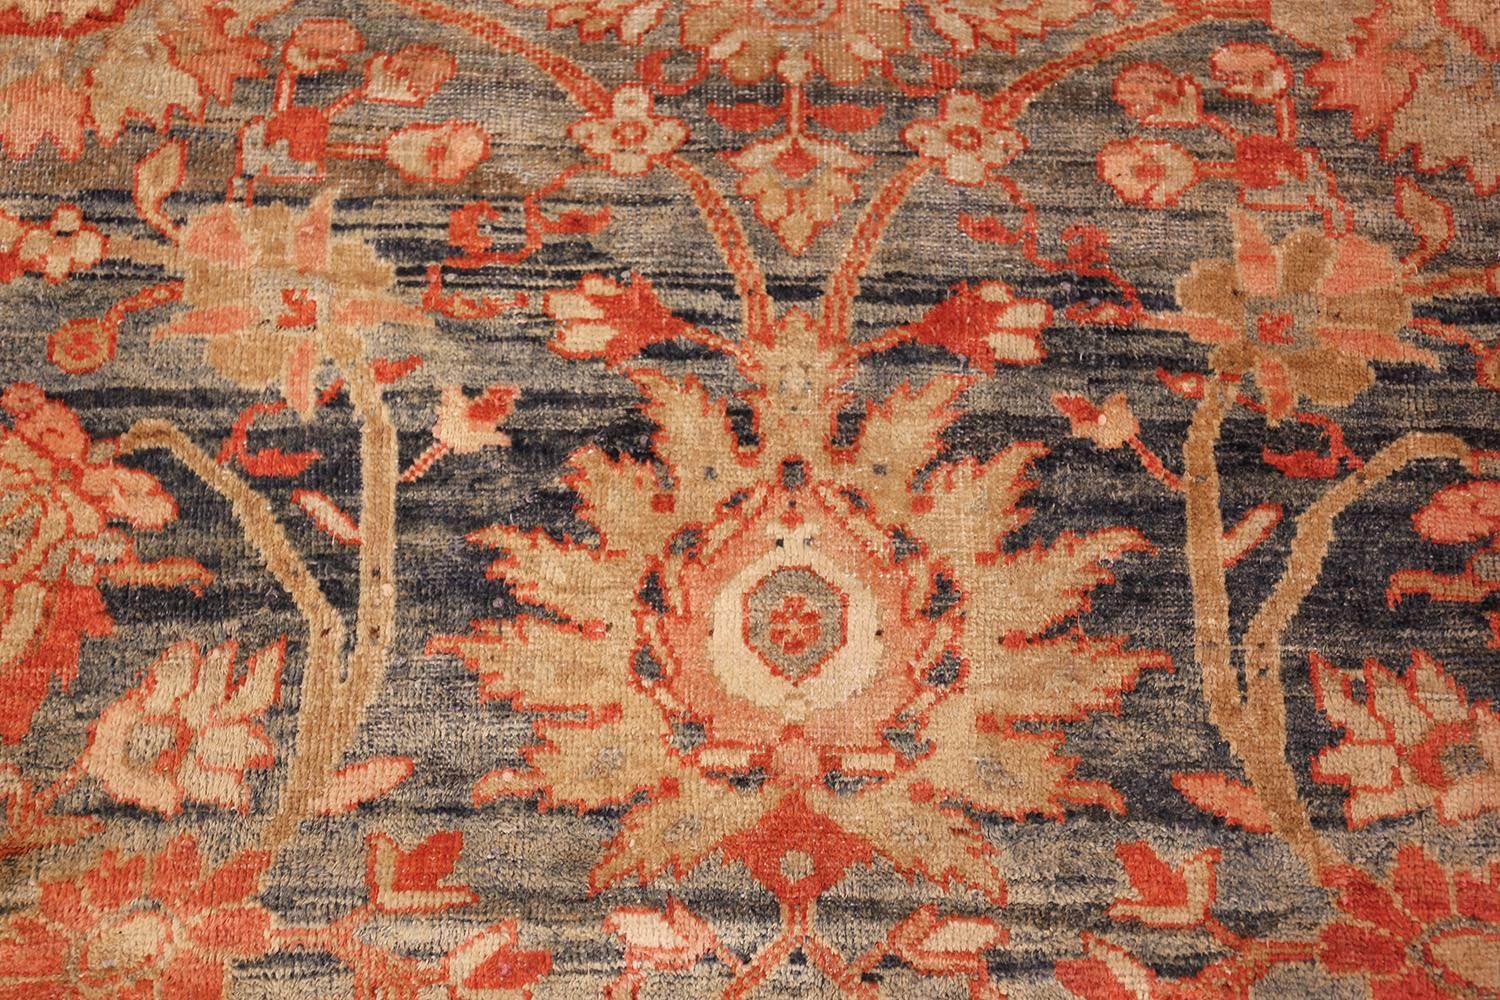 Breathtaking blue background antique Sultanabad Persian rug 49320, country of origin / rug type: Persian rug, date: circa 1900. This Persian Sultanabad rug has a more traditional design and incorporates colors that is sure to complement the colors